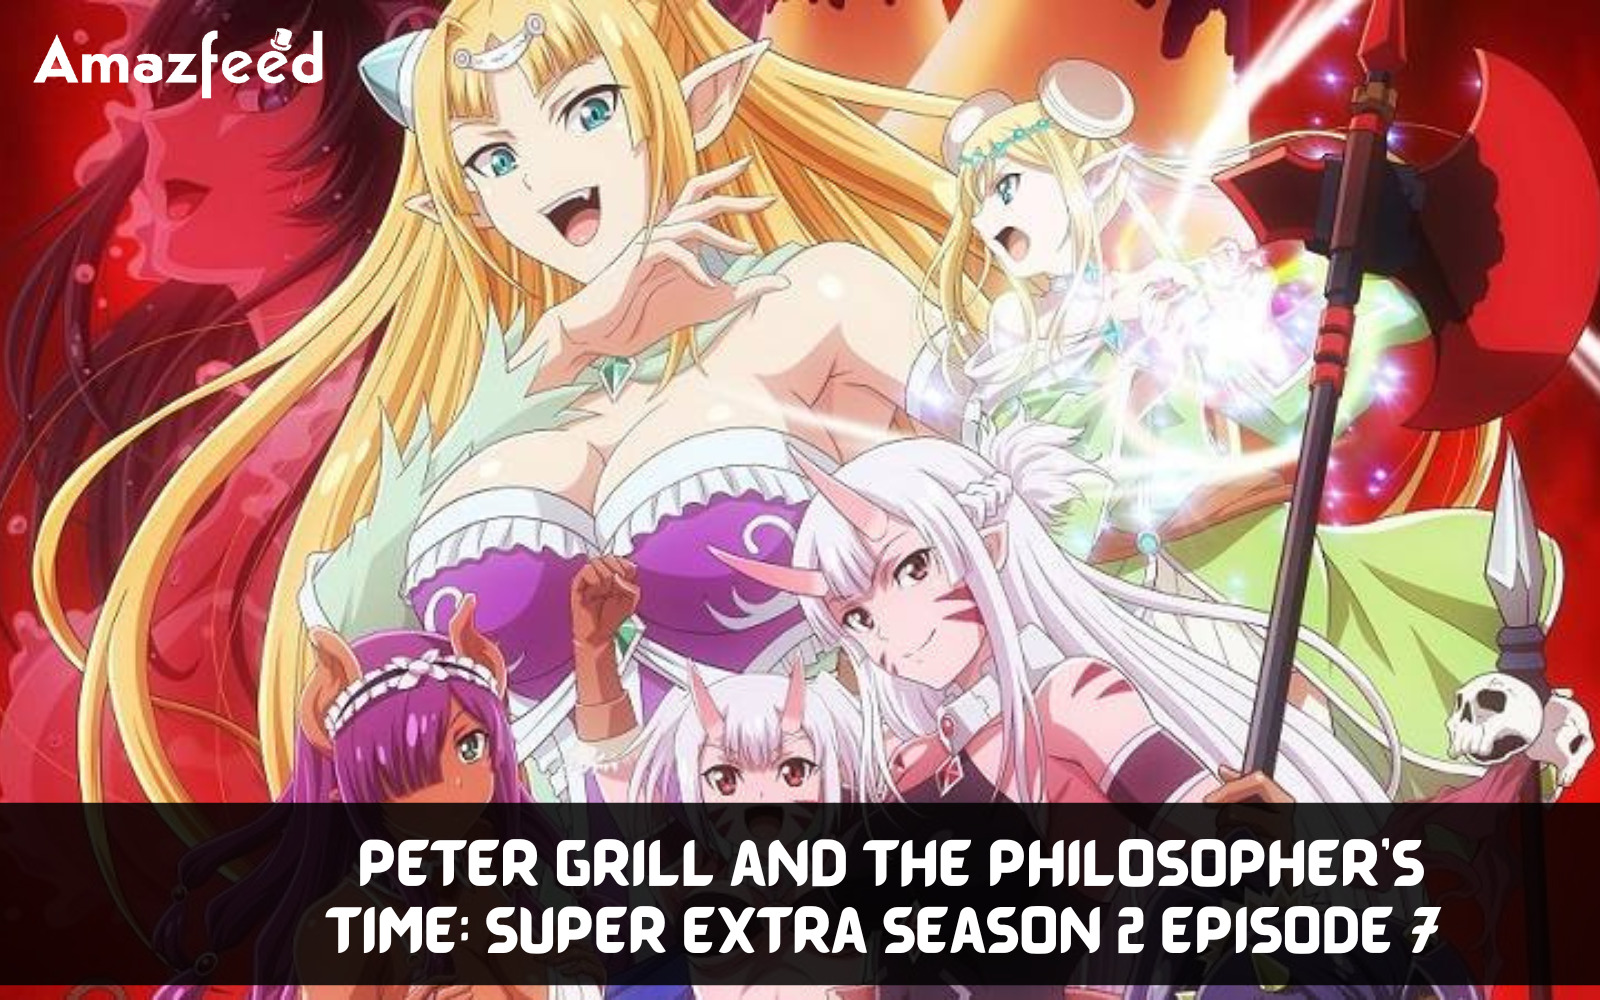 Peter Grill and the Philosopher’s Time Super Extra Season 2 Episode 7 release date